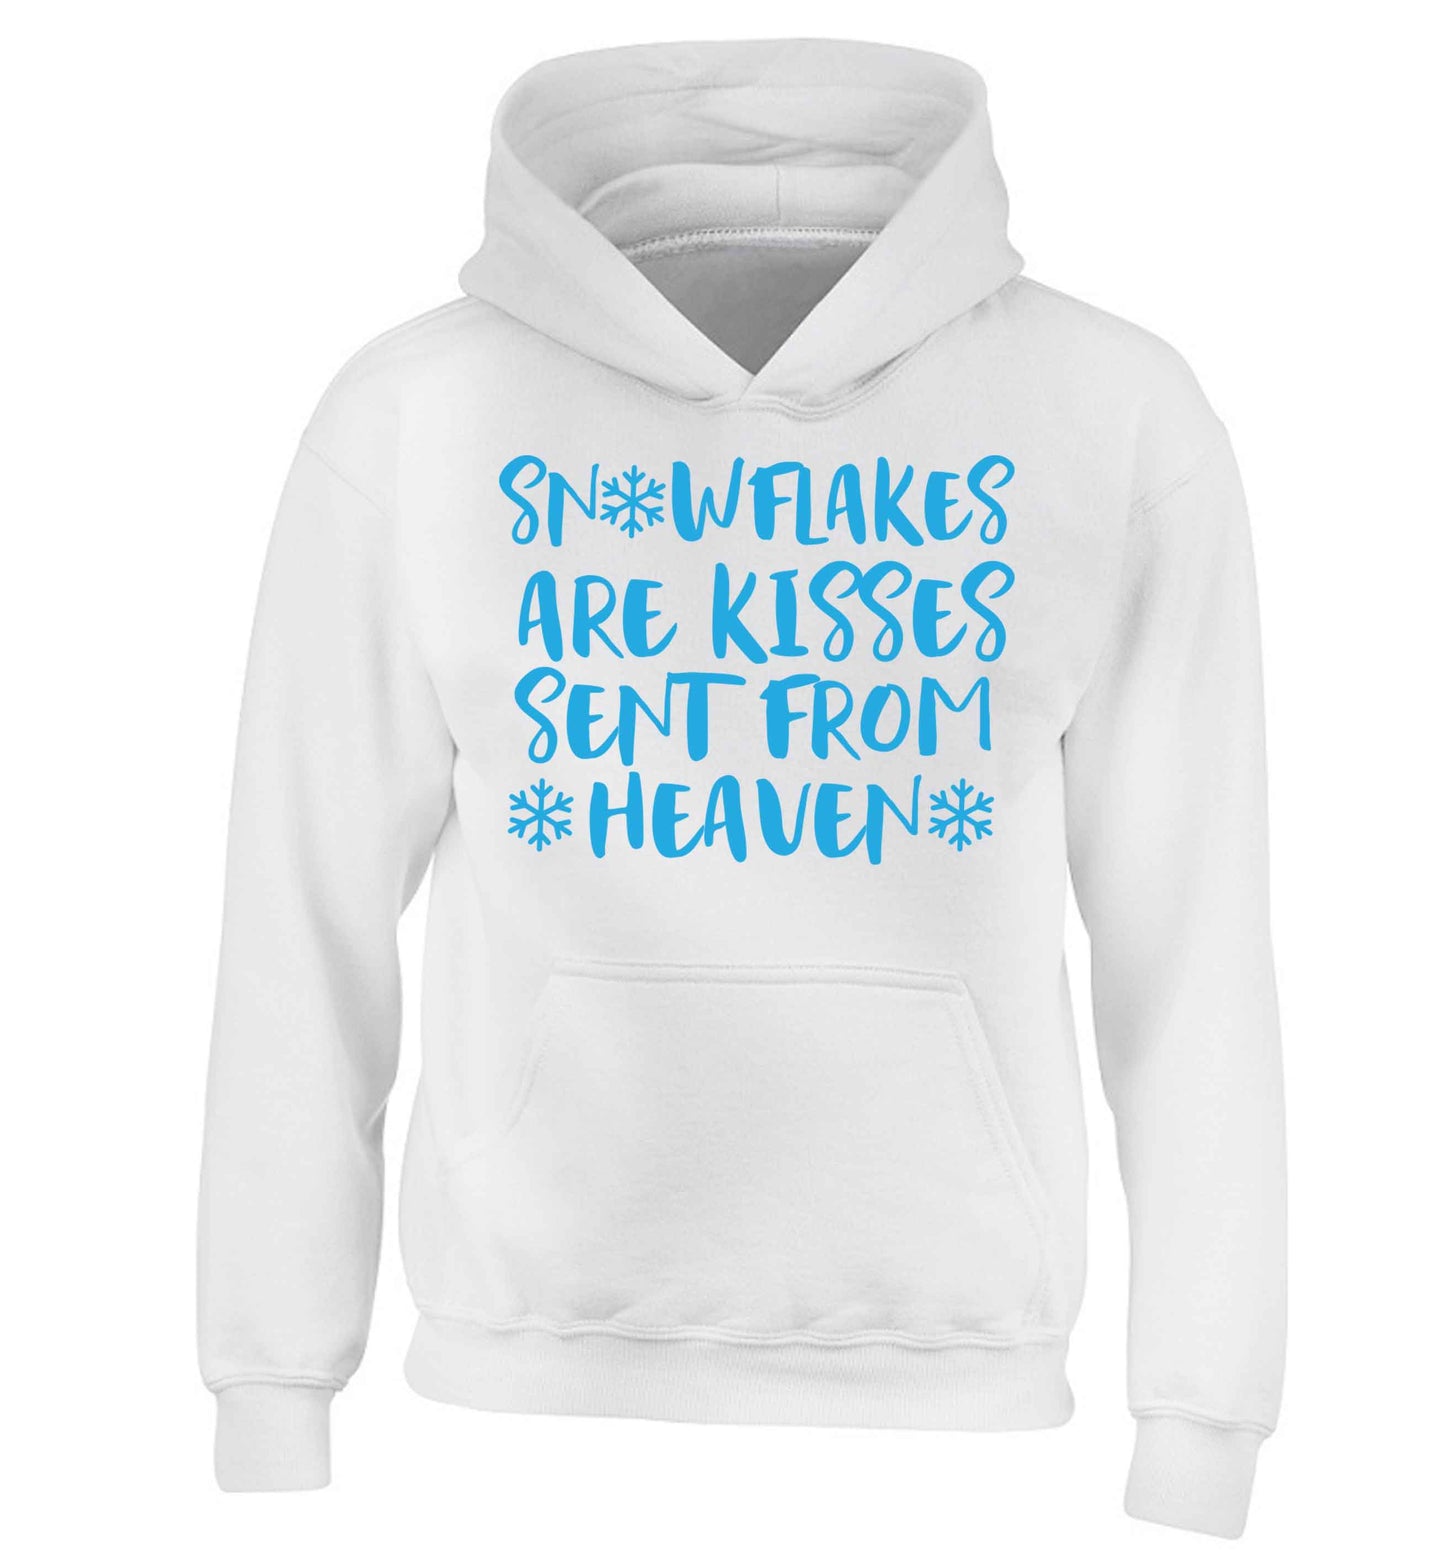 Snowflakes are kisses sent from heaven children's white hoodie 12-13 Years